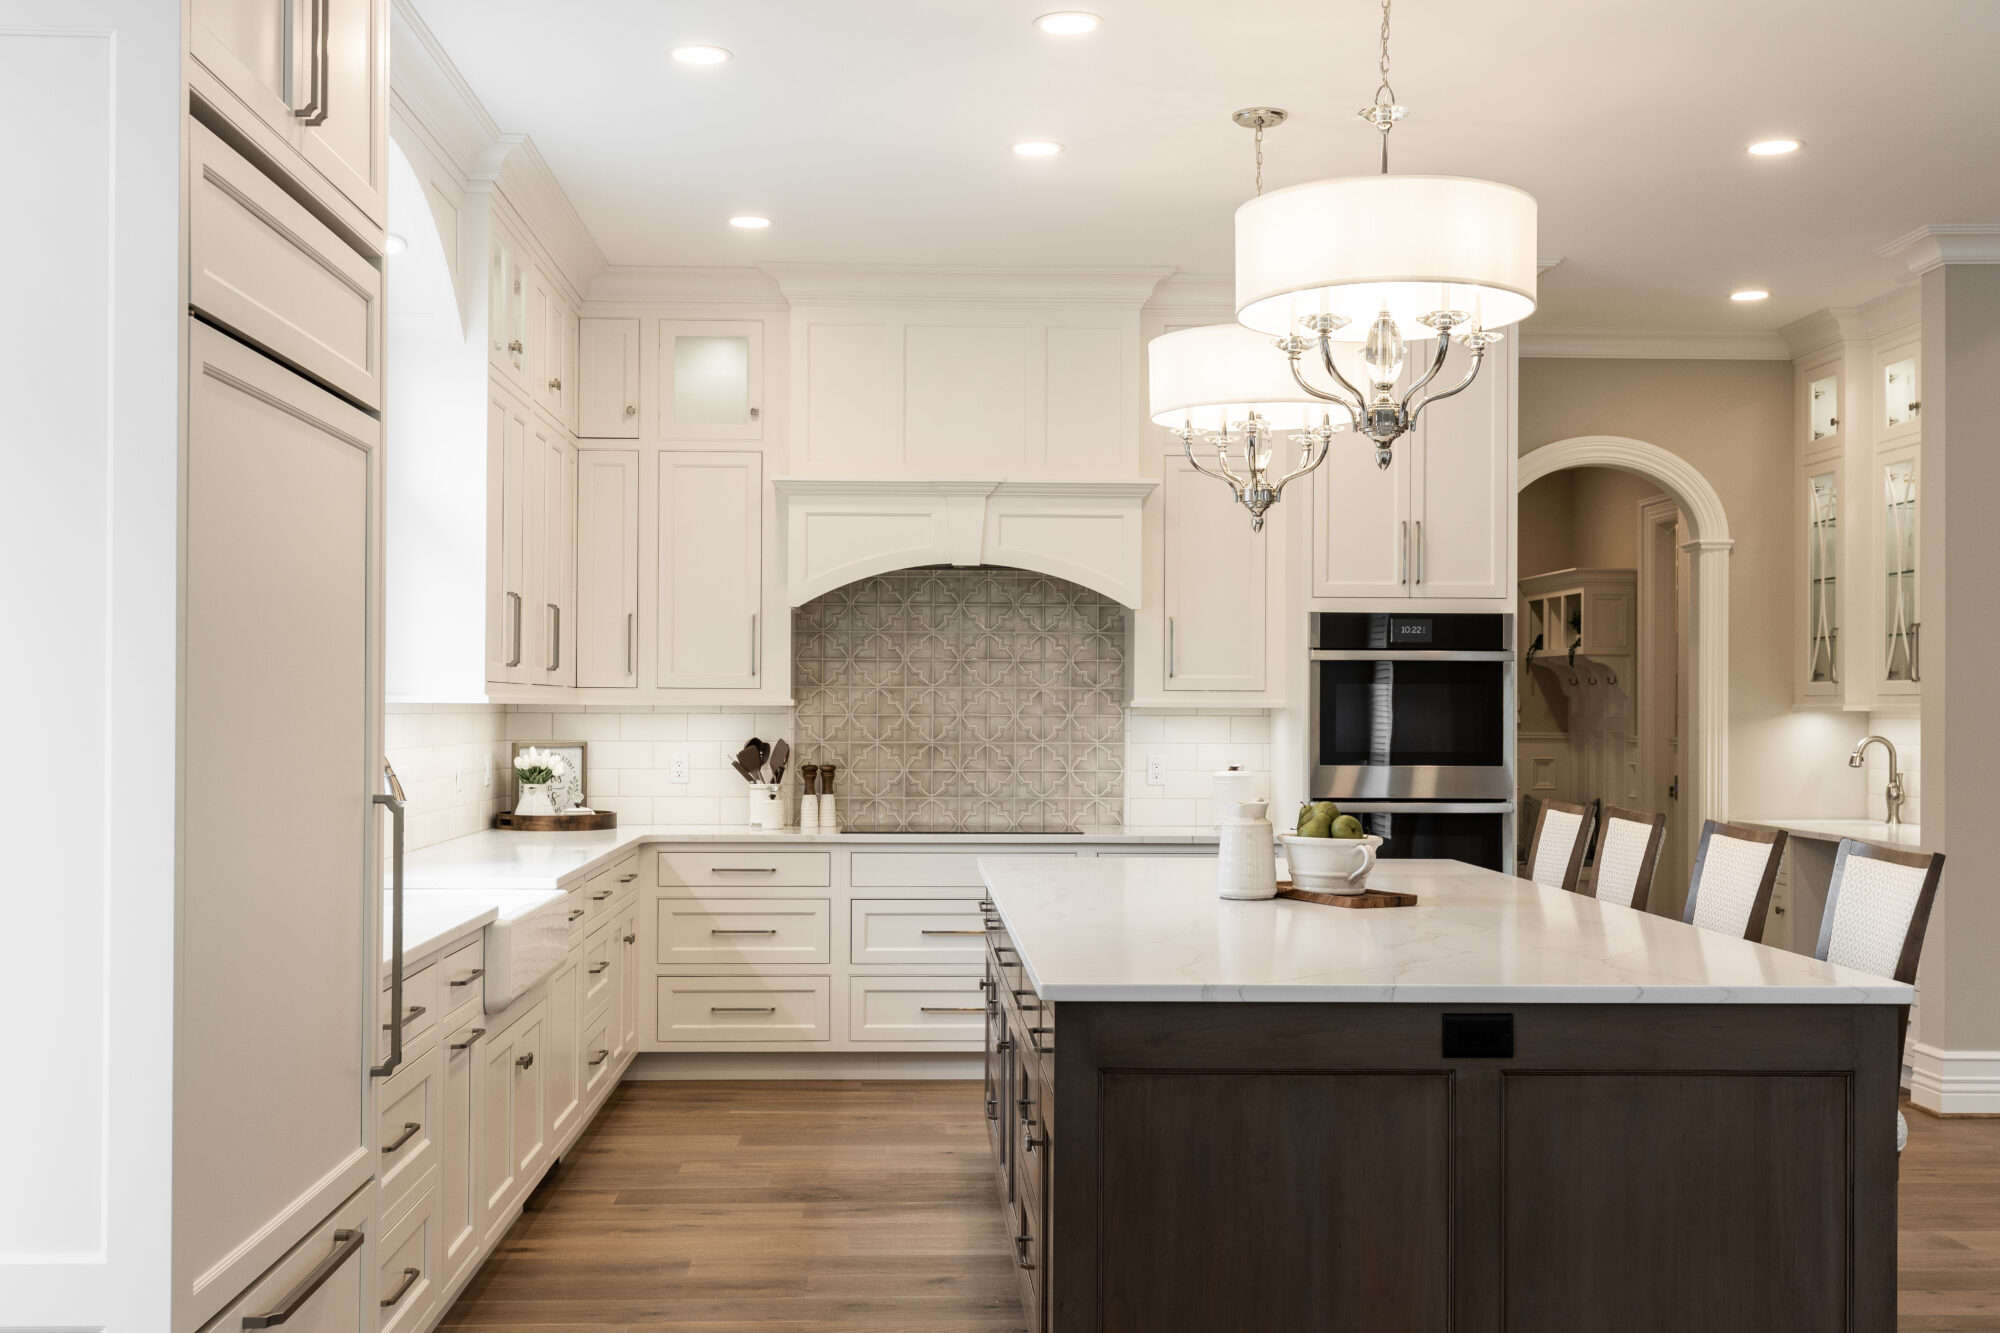 R.E. McNamara's renovated kitchen featuring light brown hardwood flooring, white custom cabinetry, and a central island with contrasting dark brown cabinets, highlighting their expertise in residential projects.